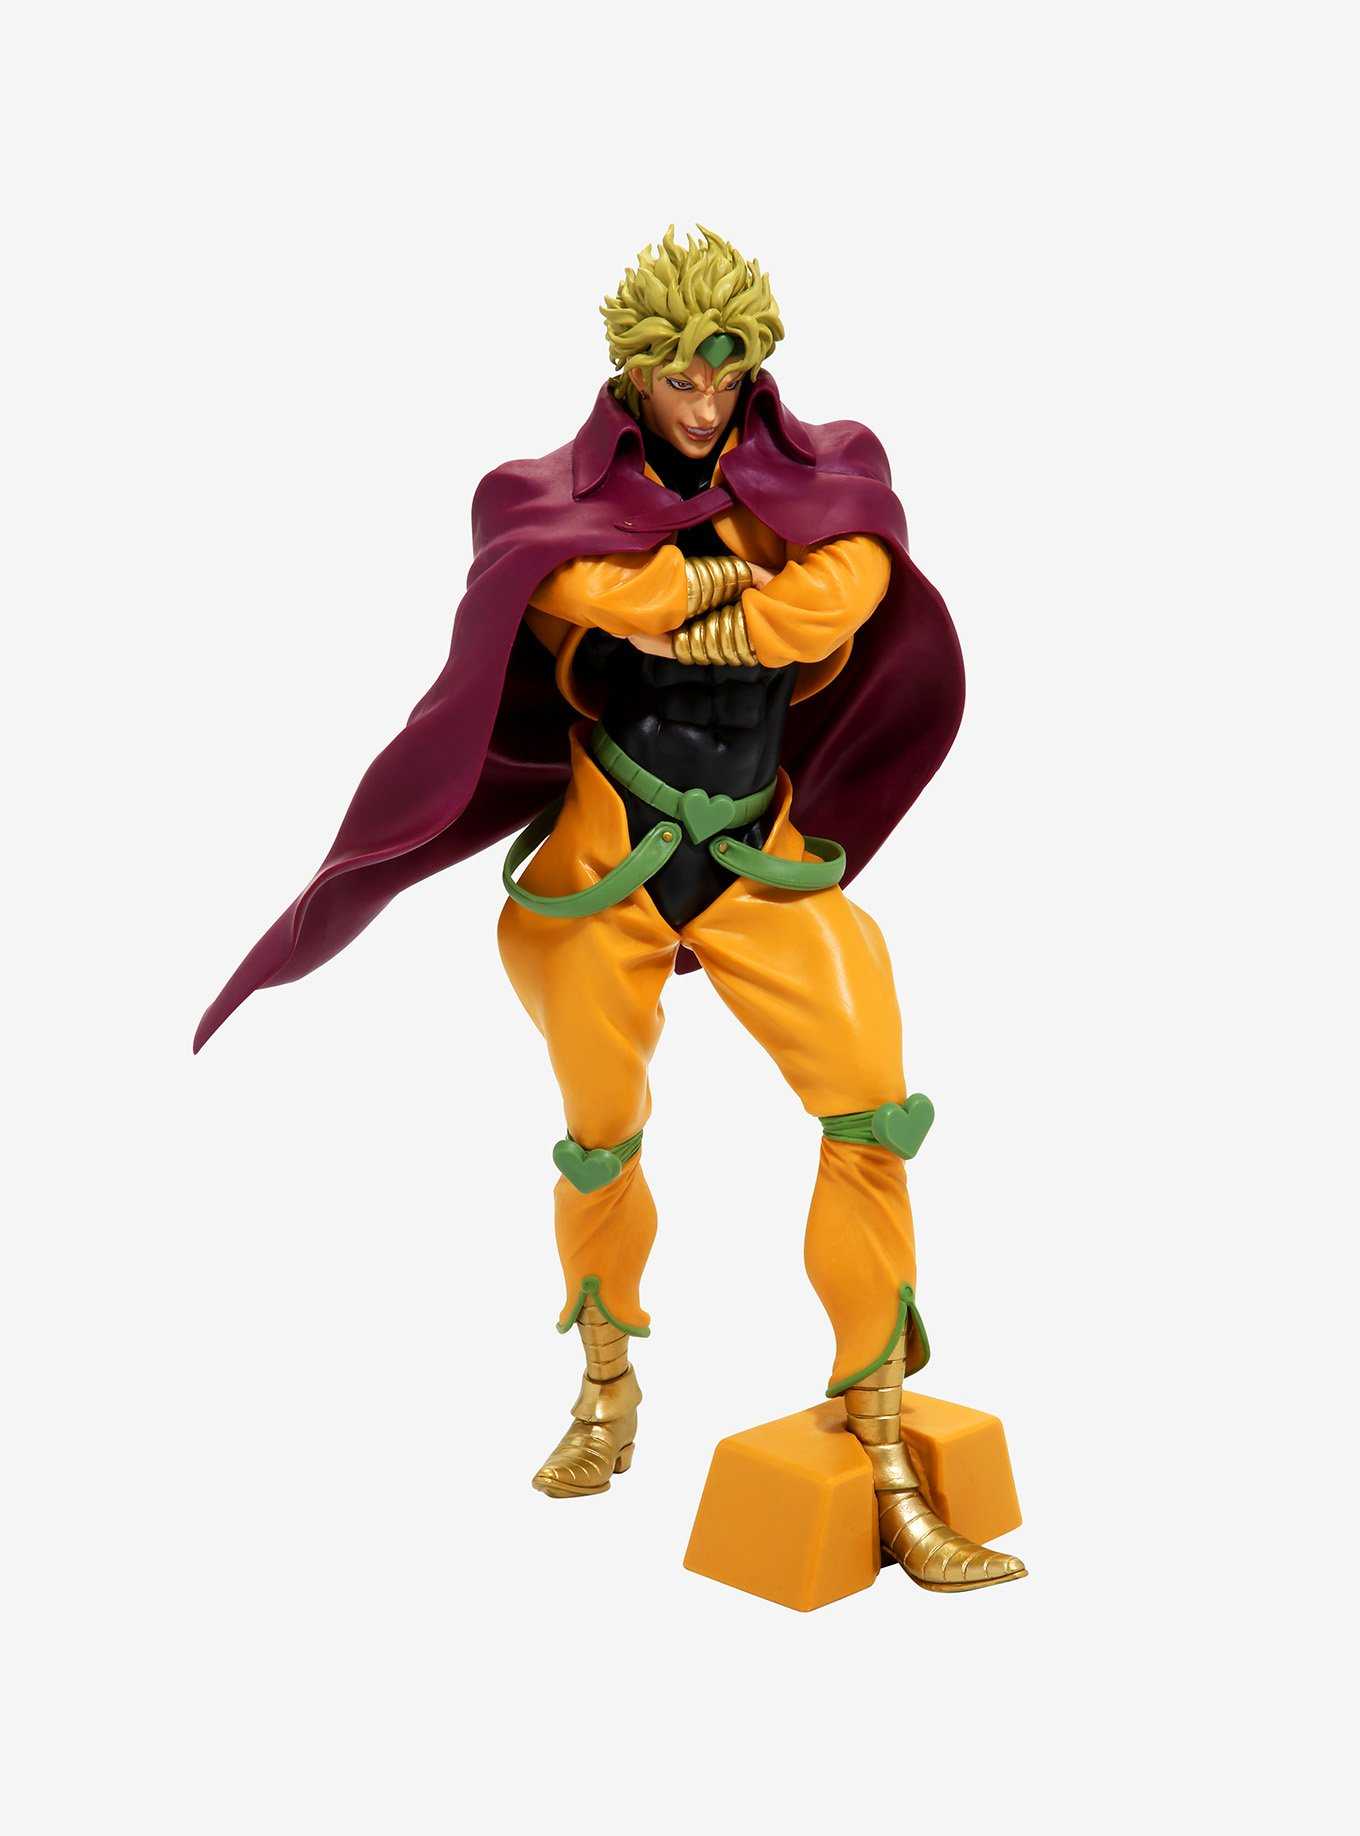 Powerful. Large. Deep., For your Shadow Dio needs.